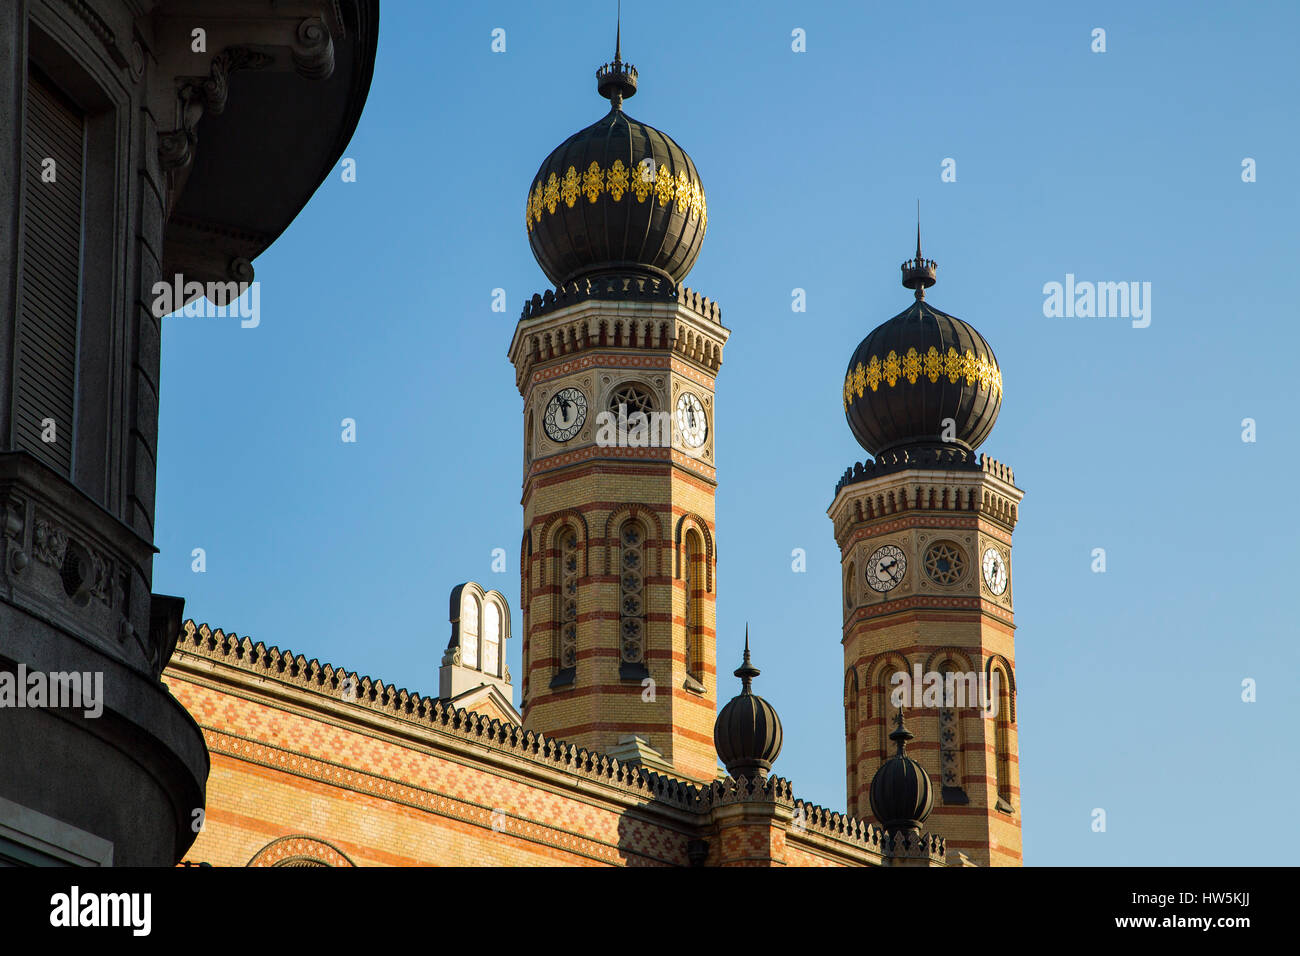 Dohány Street or Great Jewish Synagogue nagy zsinagóga The Second largest Synagogue in the world built in Moorish Revival Style. Budapest Hungary, Sou Stock Photo